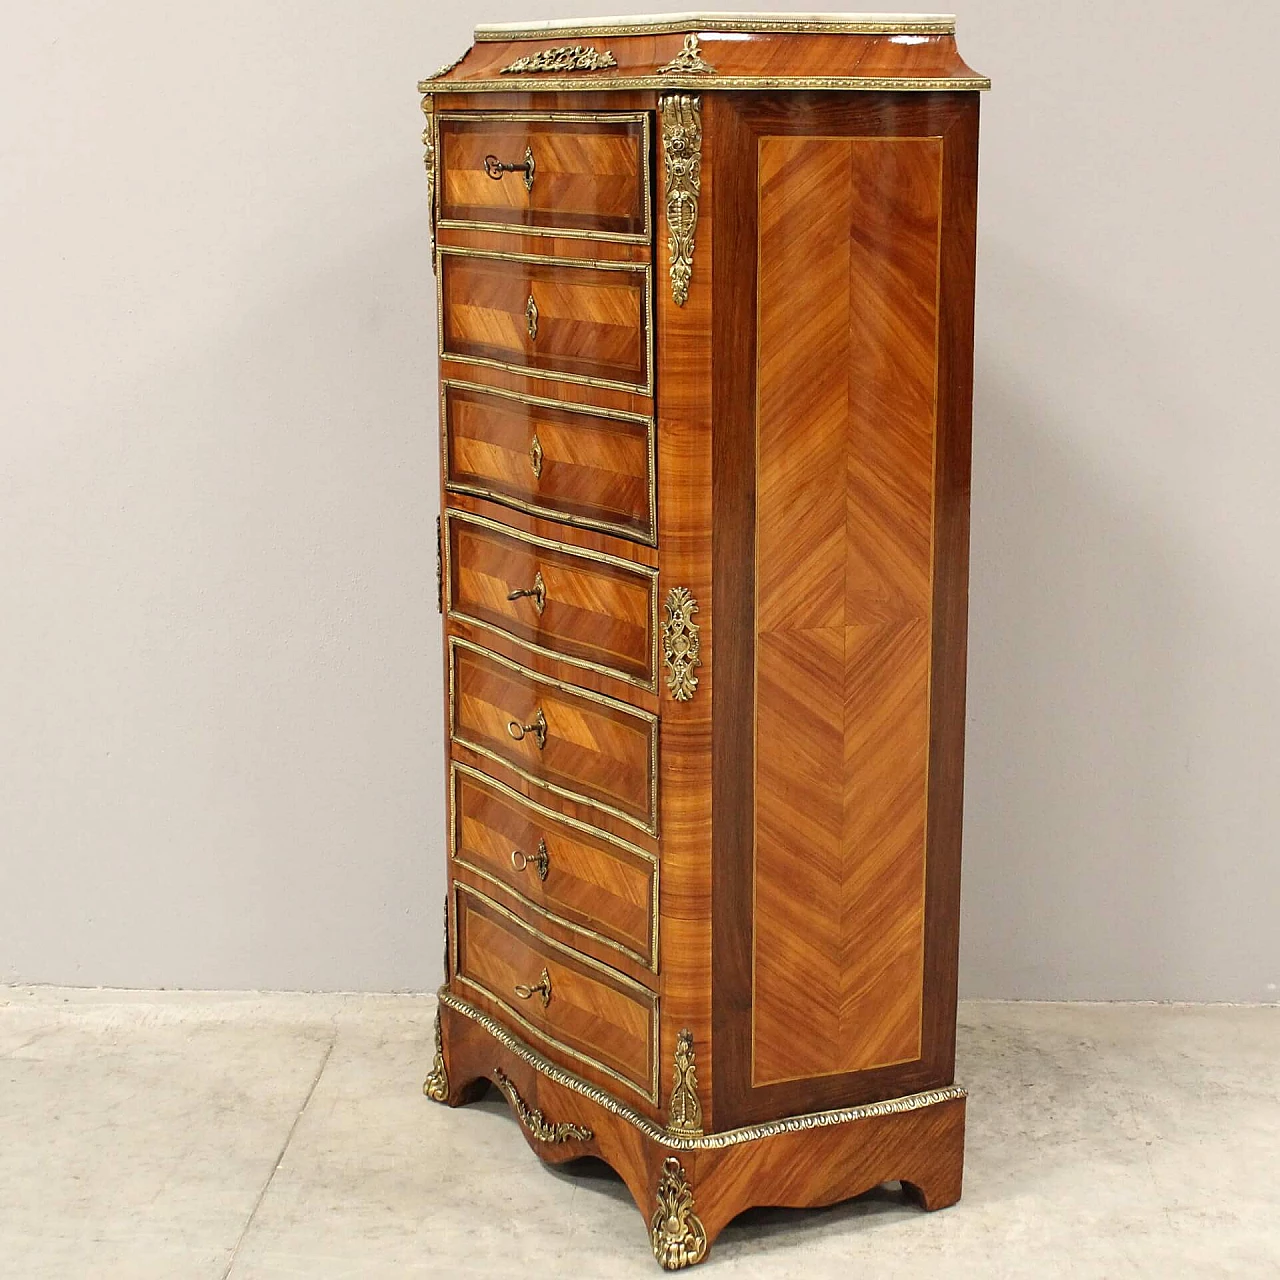 Napoleon III secretaire in bois de rose, rosewood inlay and gilded bronze with marble top, 19th century 1